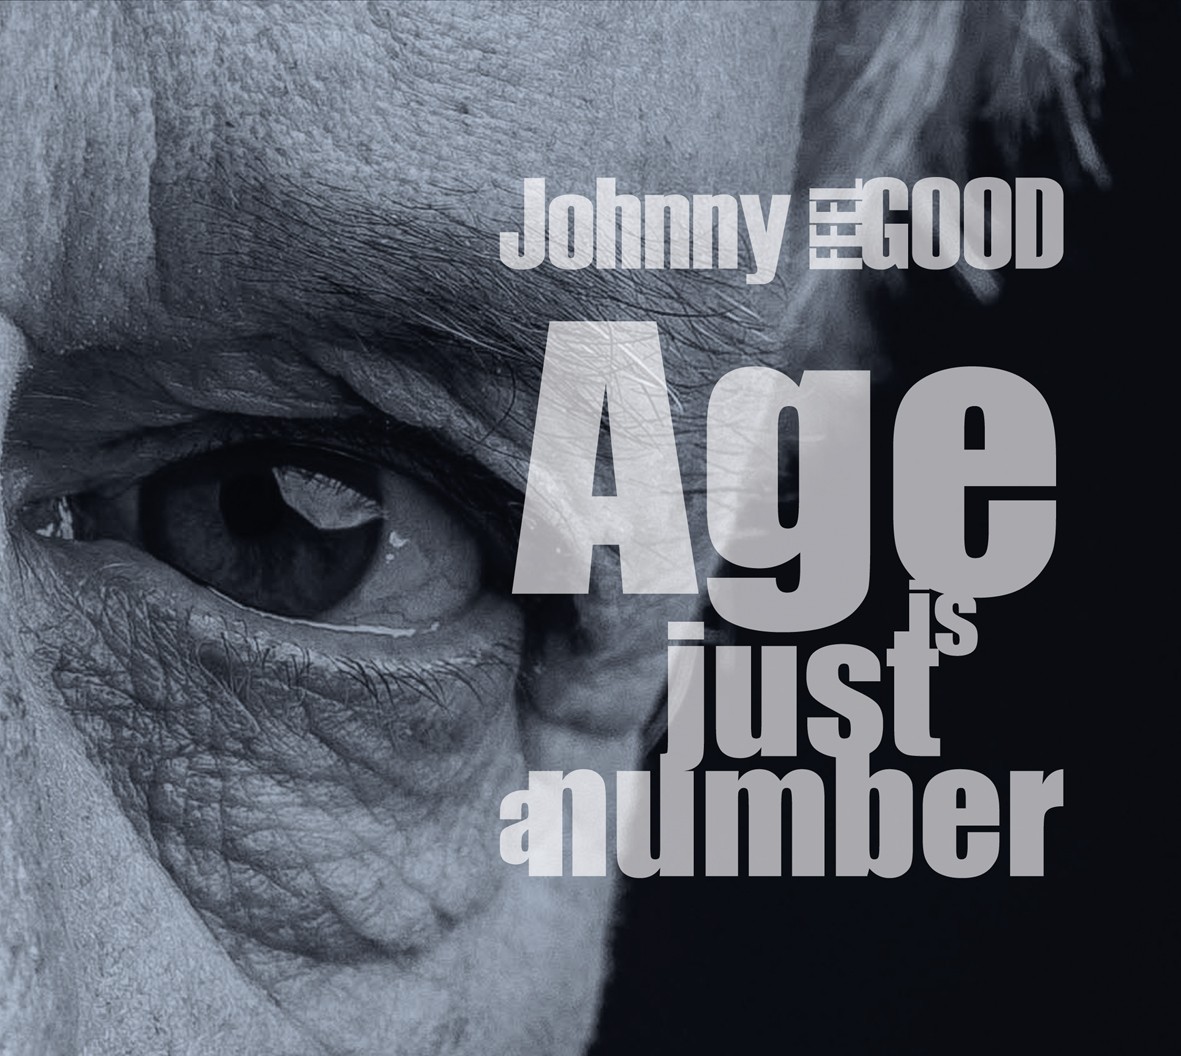 Johnny Feel Good - Age Is Just A Number